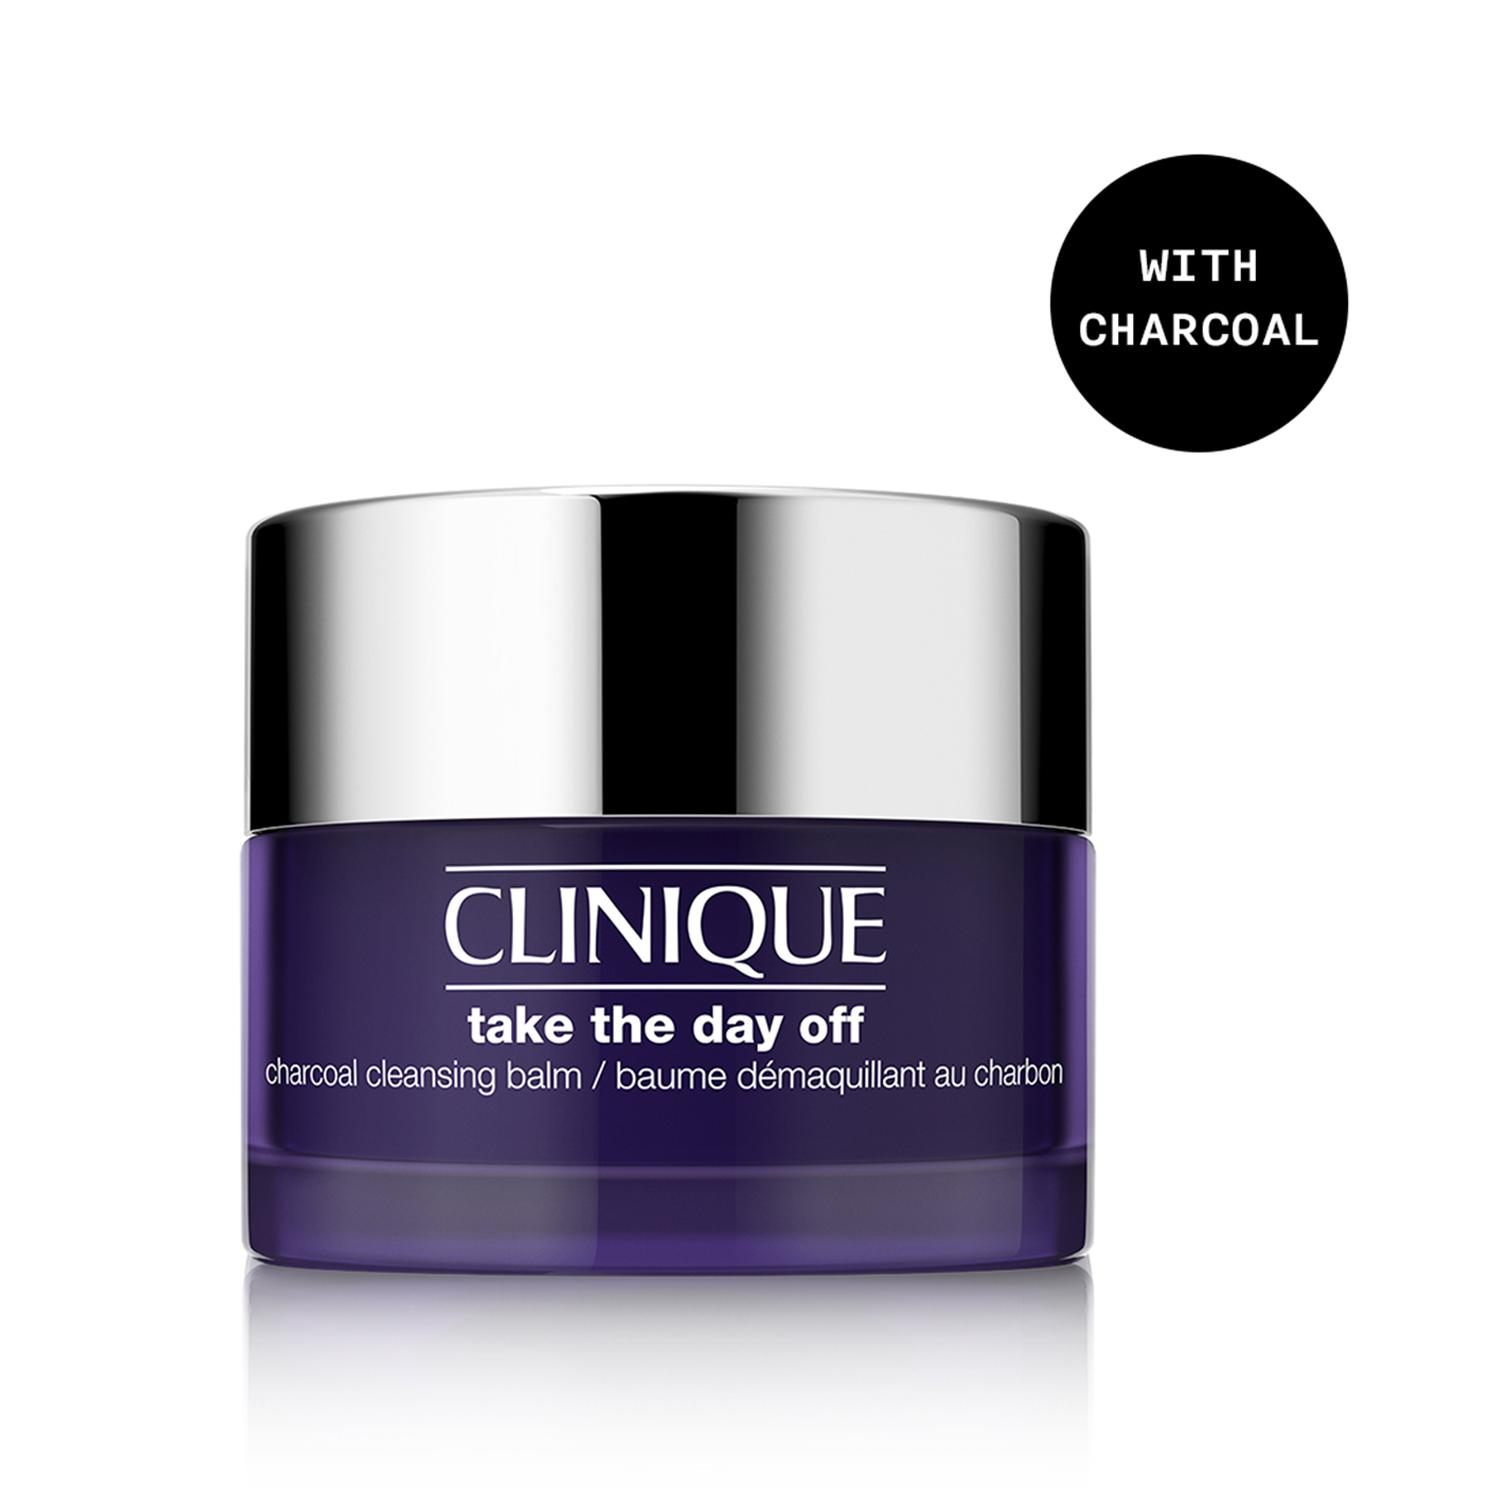 CLINIQUE | CLINIQUE Take The Day Off Charcoal Cleansing Balm (30ml)